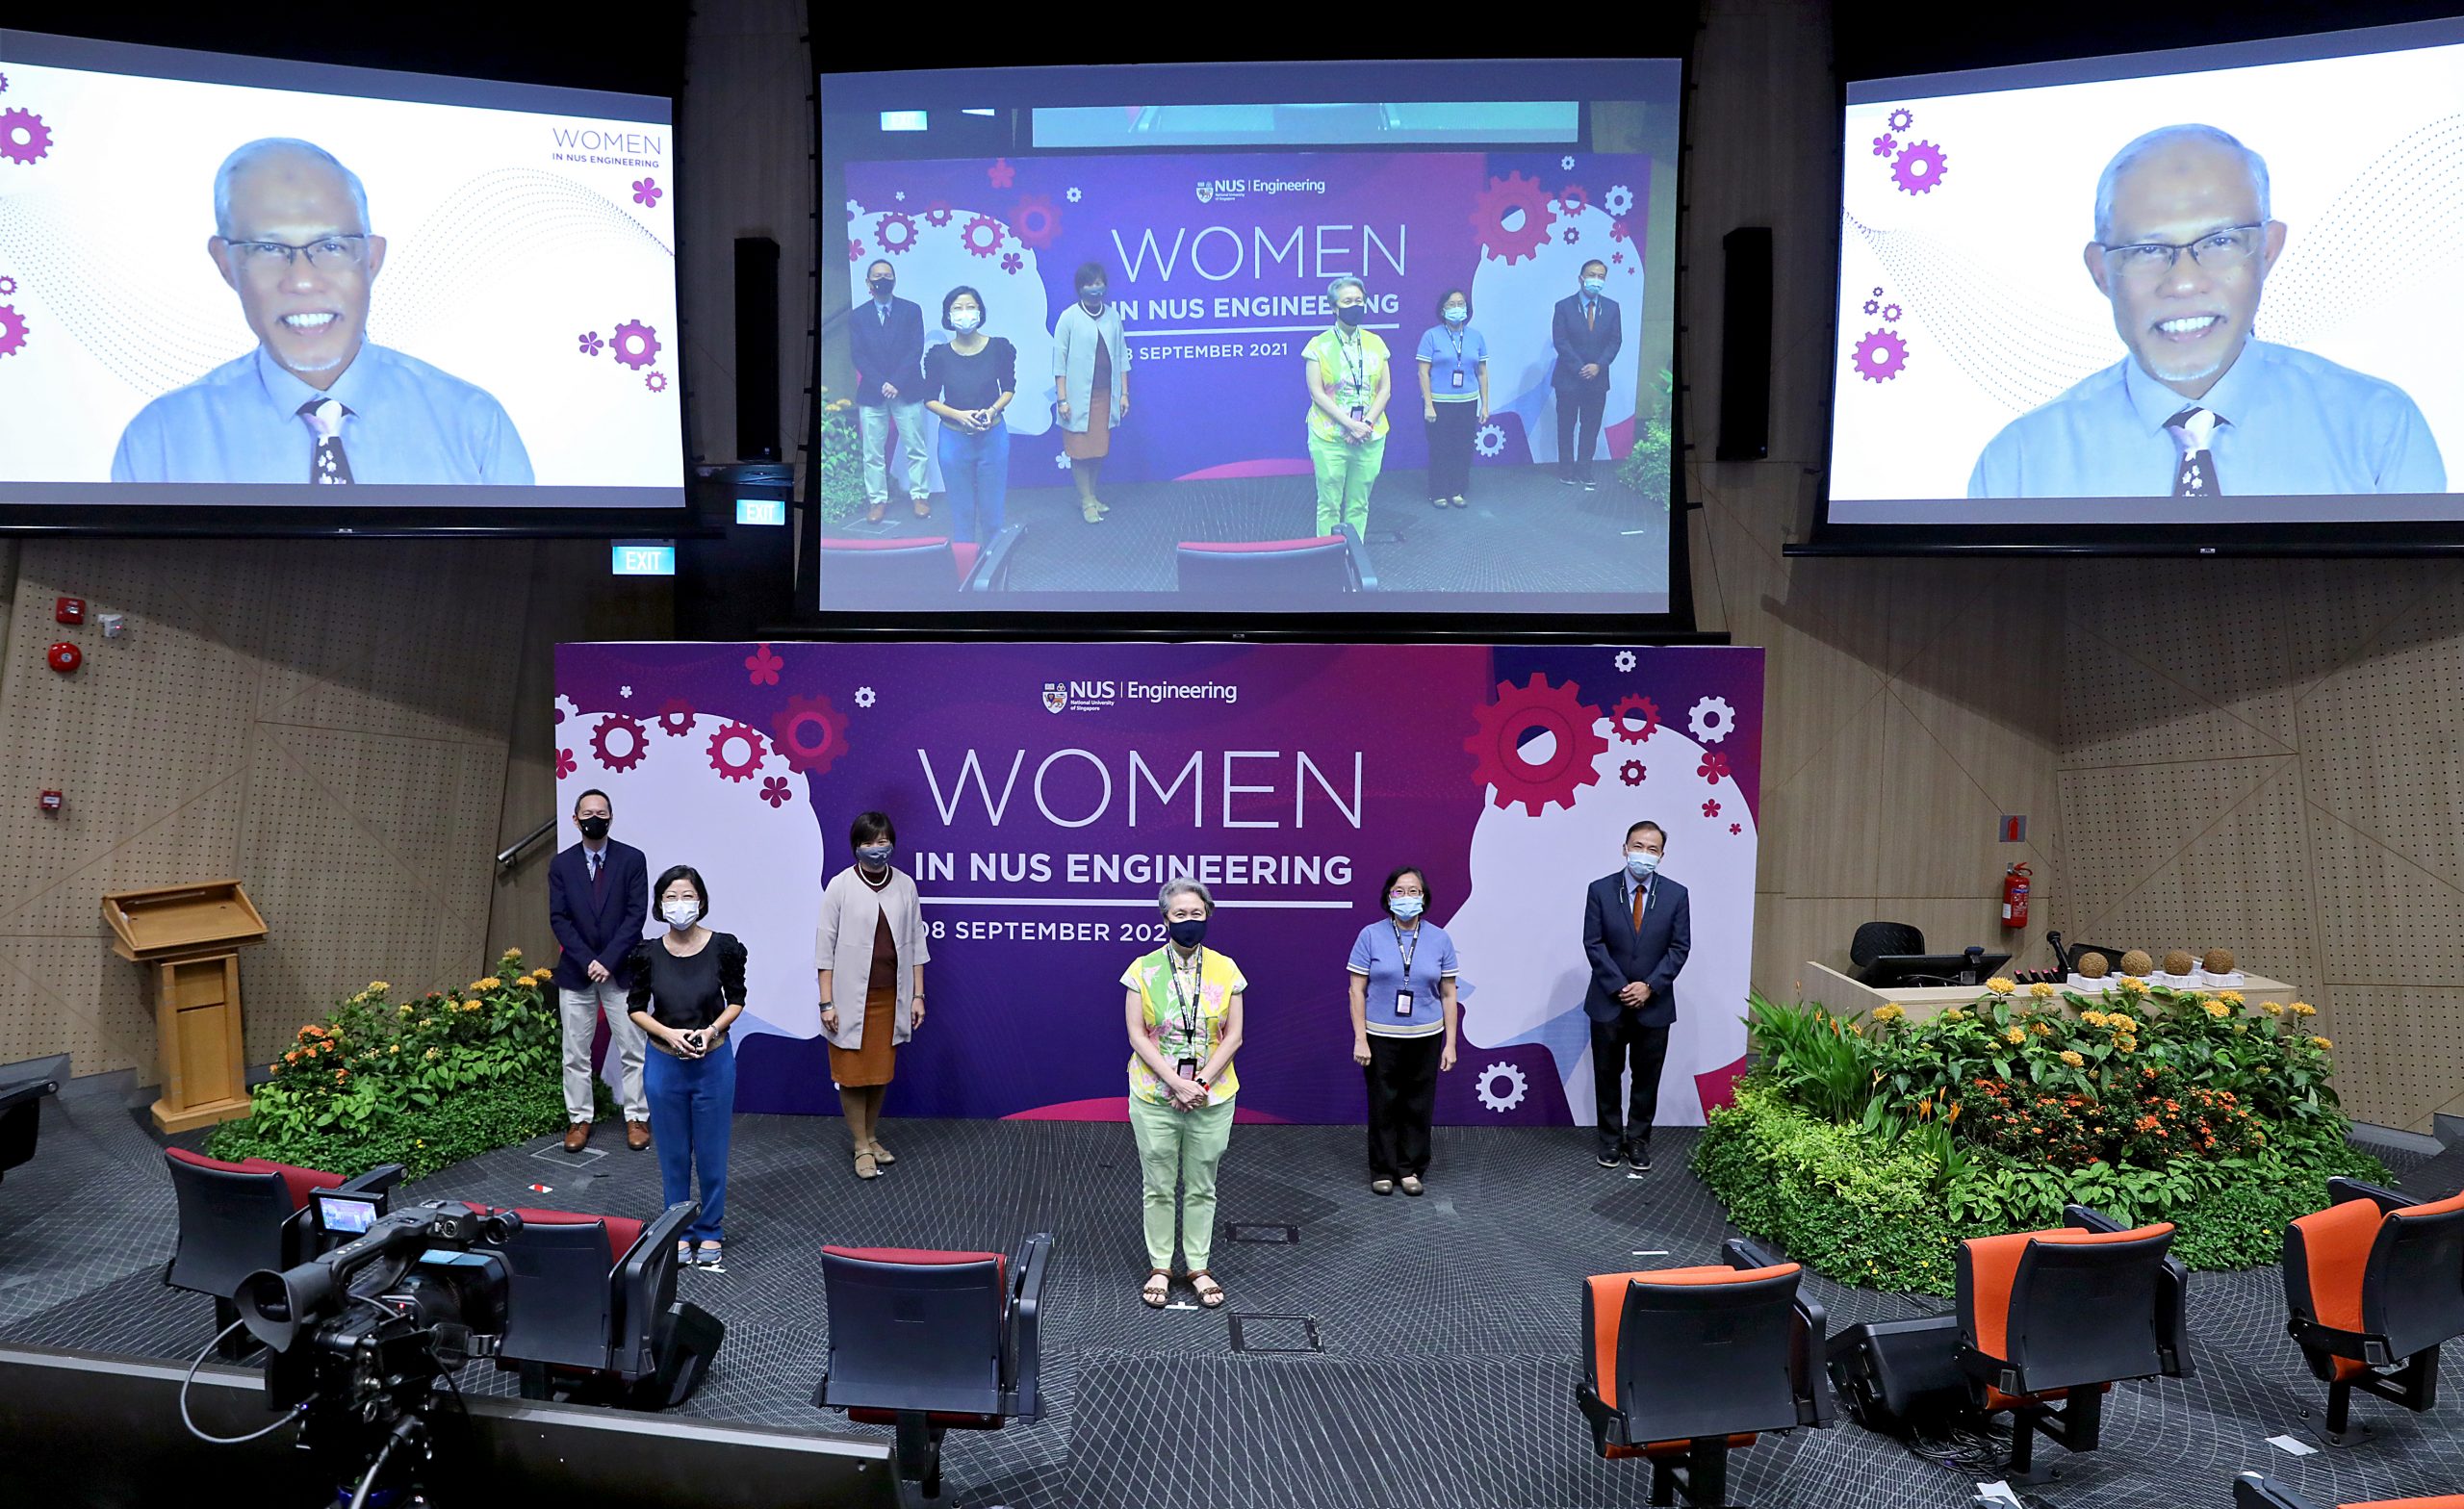 The NUS Faculty of Engineering’s inaugural “Women in NUS Engineering” event saw a line-up of celebrated guest speakers; including CEO of Temasek Holdings Ms Ho Ching, Chairman of Shell Companies in Singapore Ms Aw Kah Peng, Senior Vice President of SkyLab Services Ms Eng Se-Hsieng, and Senior Manager of Singapore Institute of Manufacturing Technology Ms Wan Siew Ping, and Guest-of-Honour and Minister for Social and Family Development, Mr Masagos Zulkifli, who joined via video.